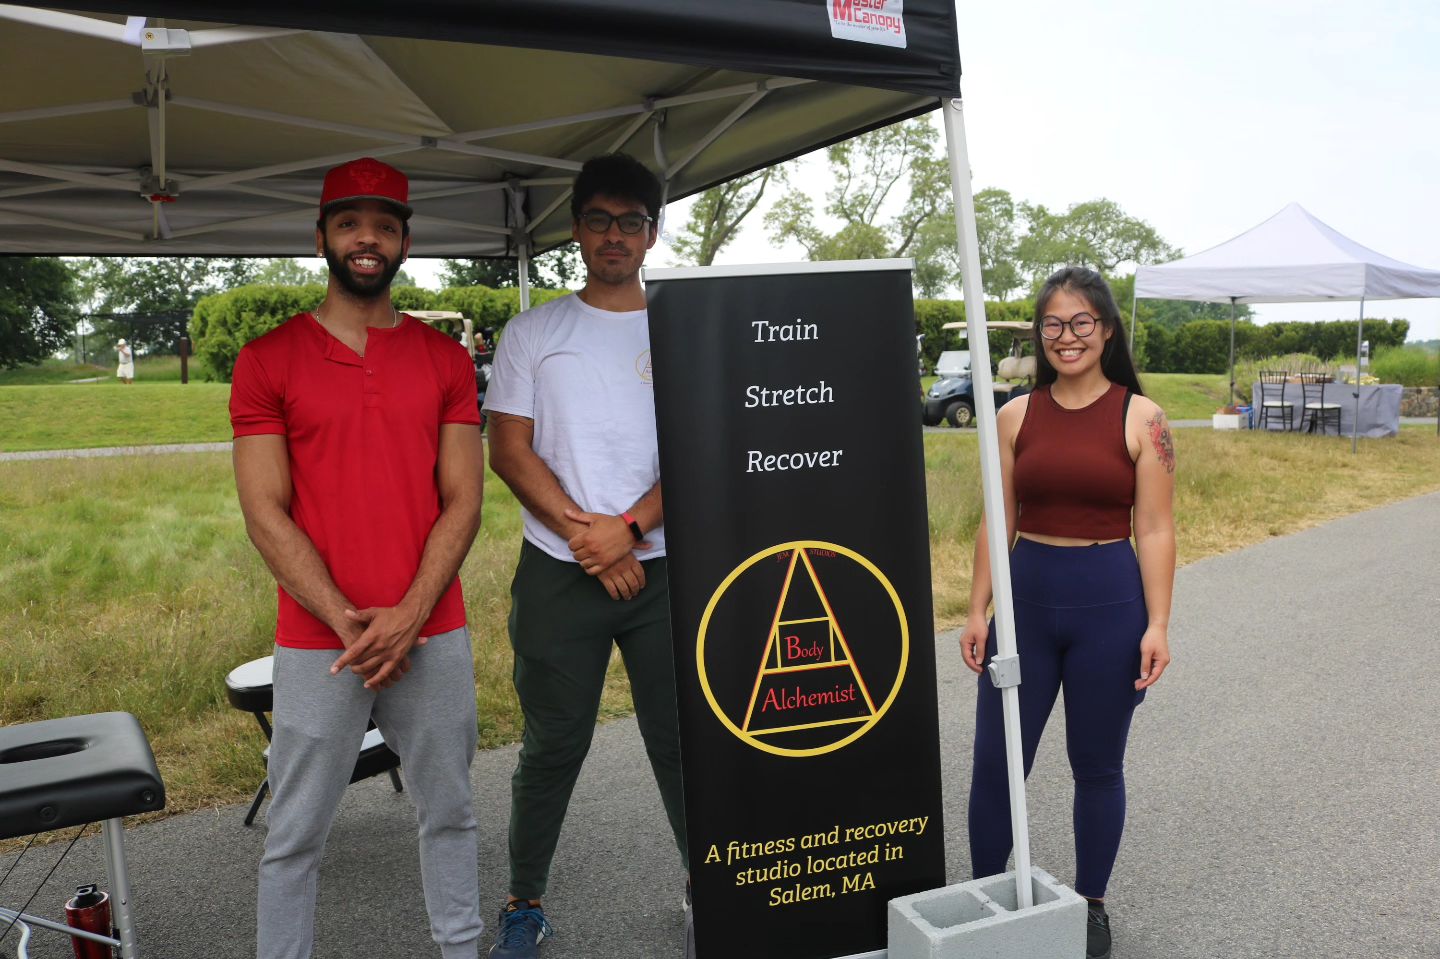 Three Body Alchemist employees pose under a tent with a sign.